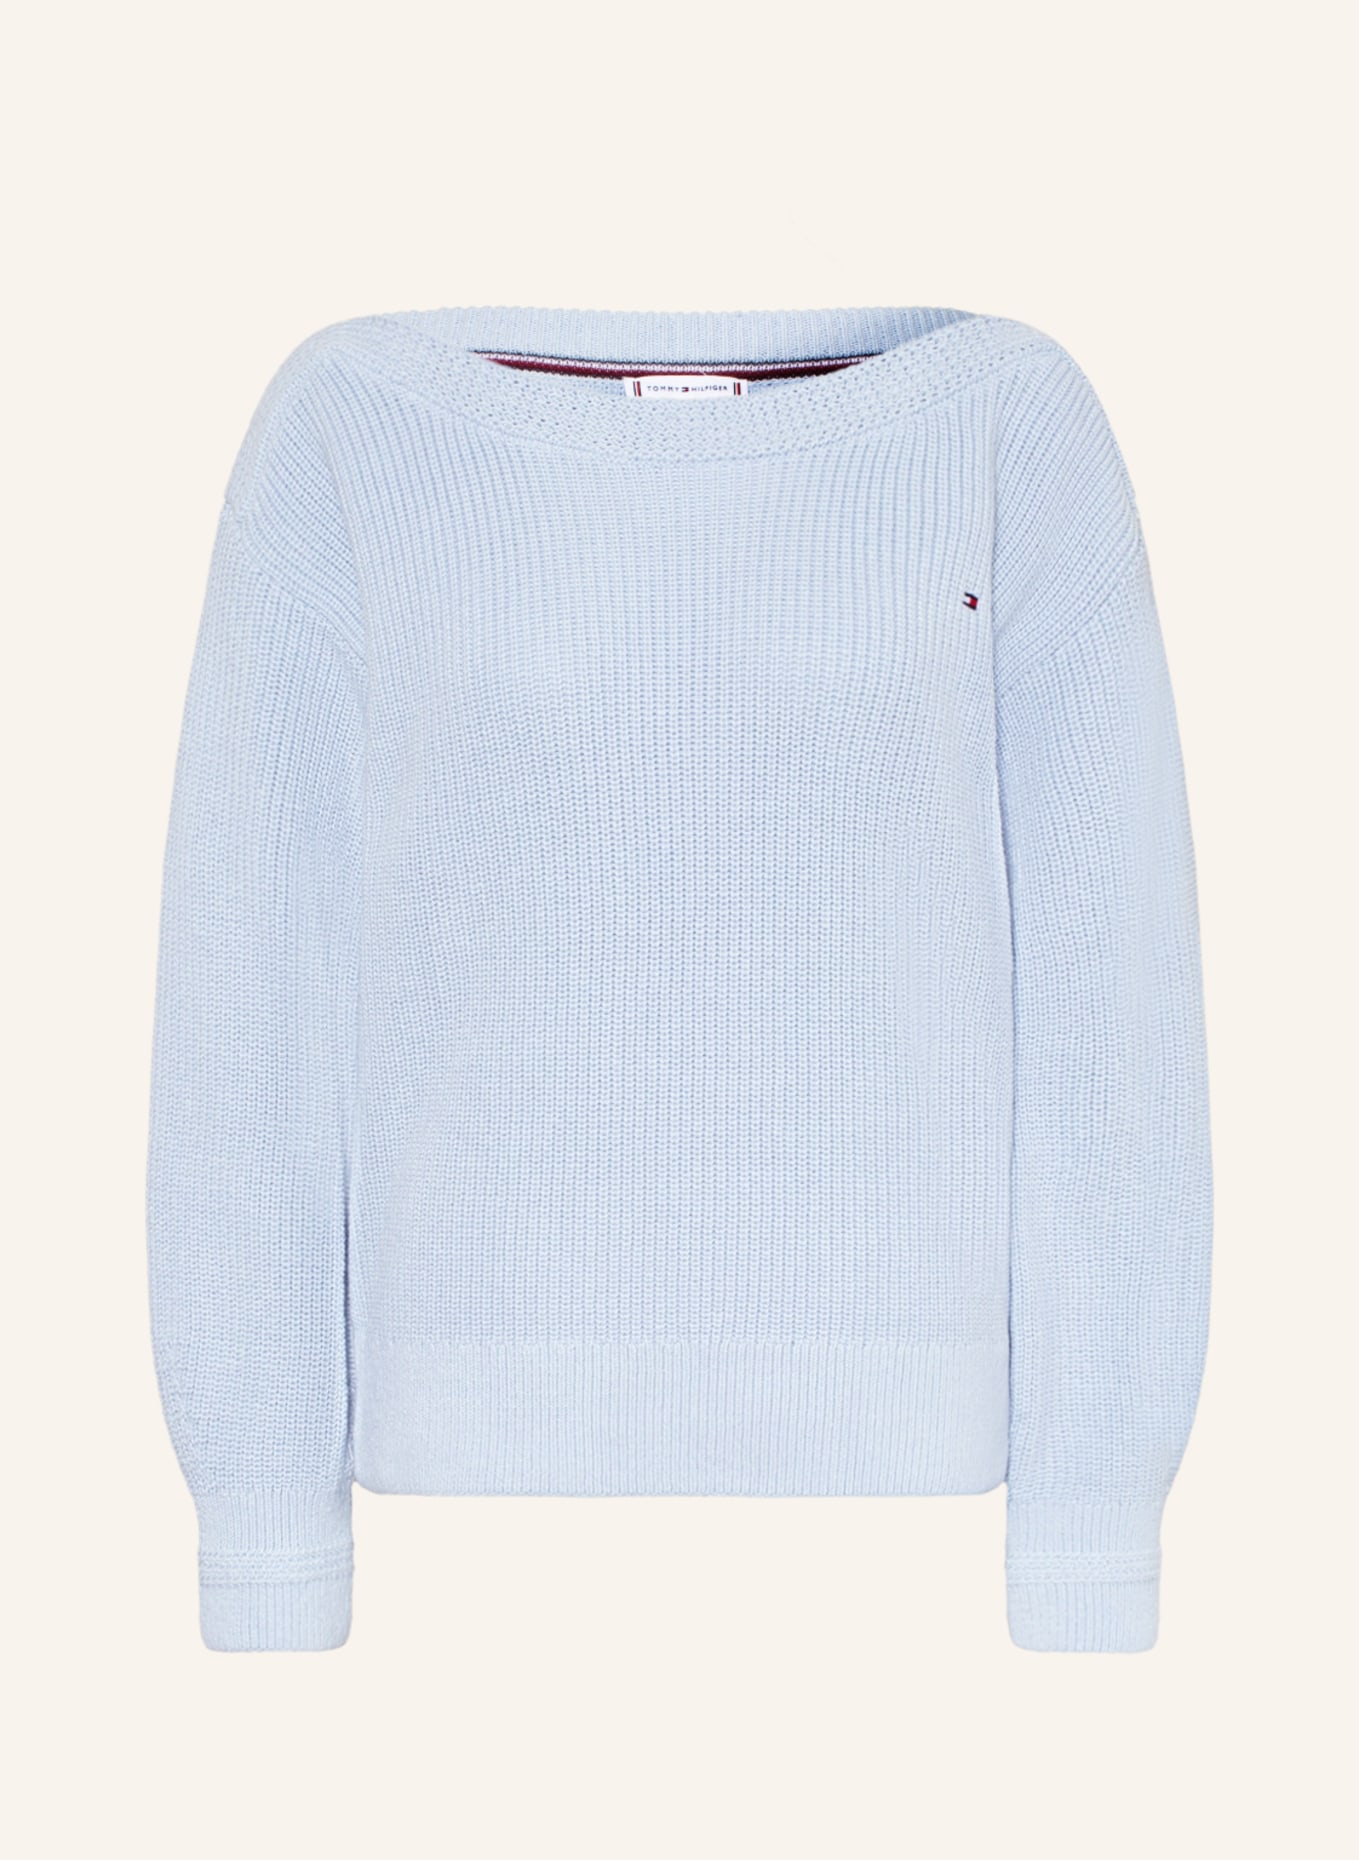 TOMMY HILFIGER Sweater in light